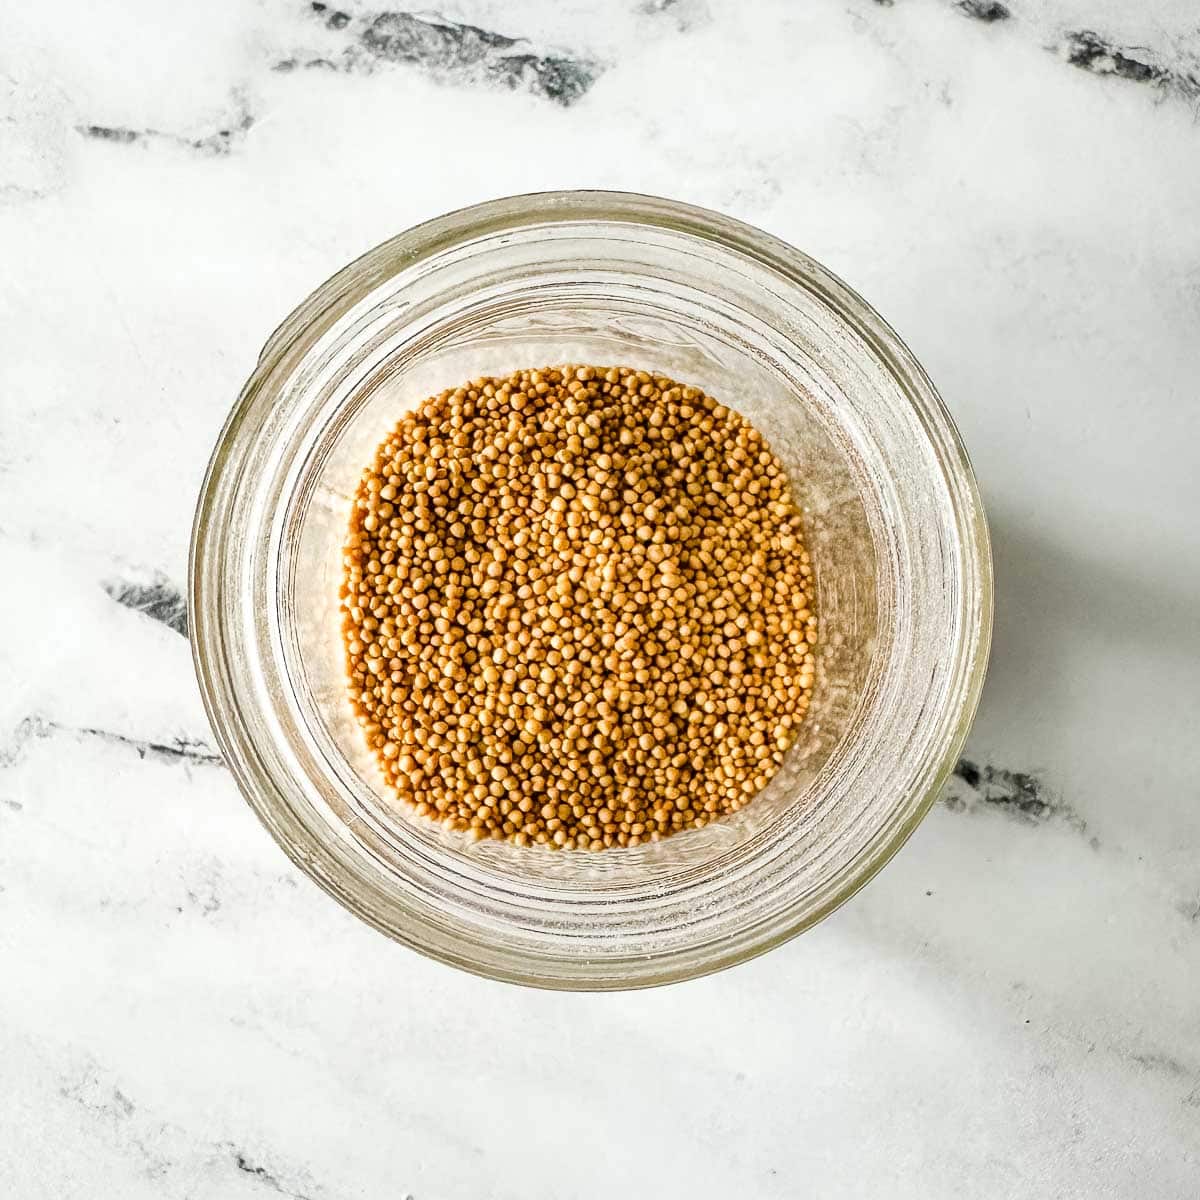 Overhead view of yellow mustard seeds in a glass jar.